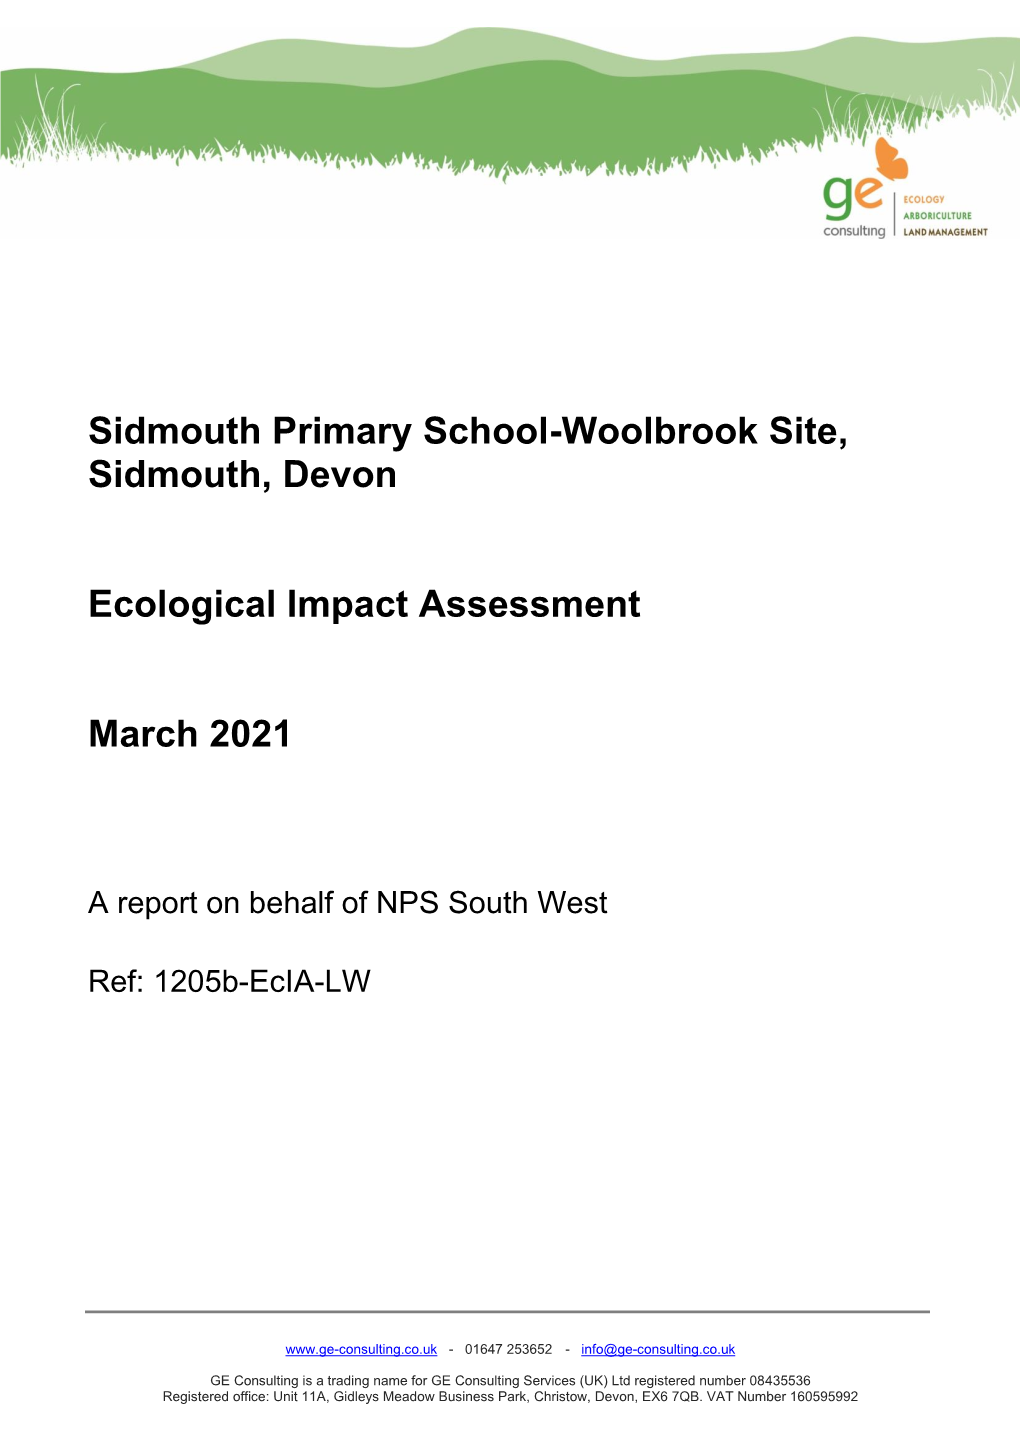 Sidmouth Primary School-Woolbrook Site, Sidmouth, Devon Ecological Impact Assessment March 2021